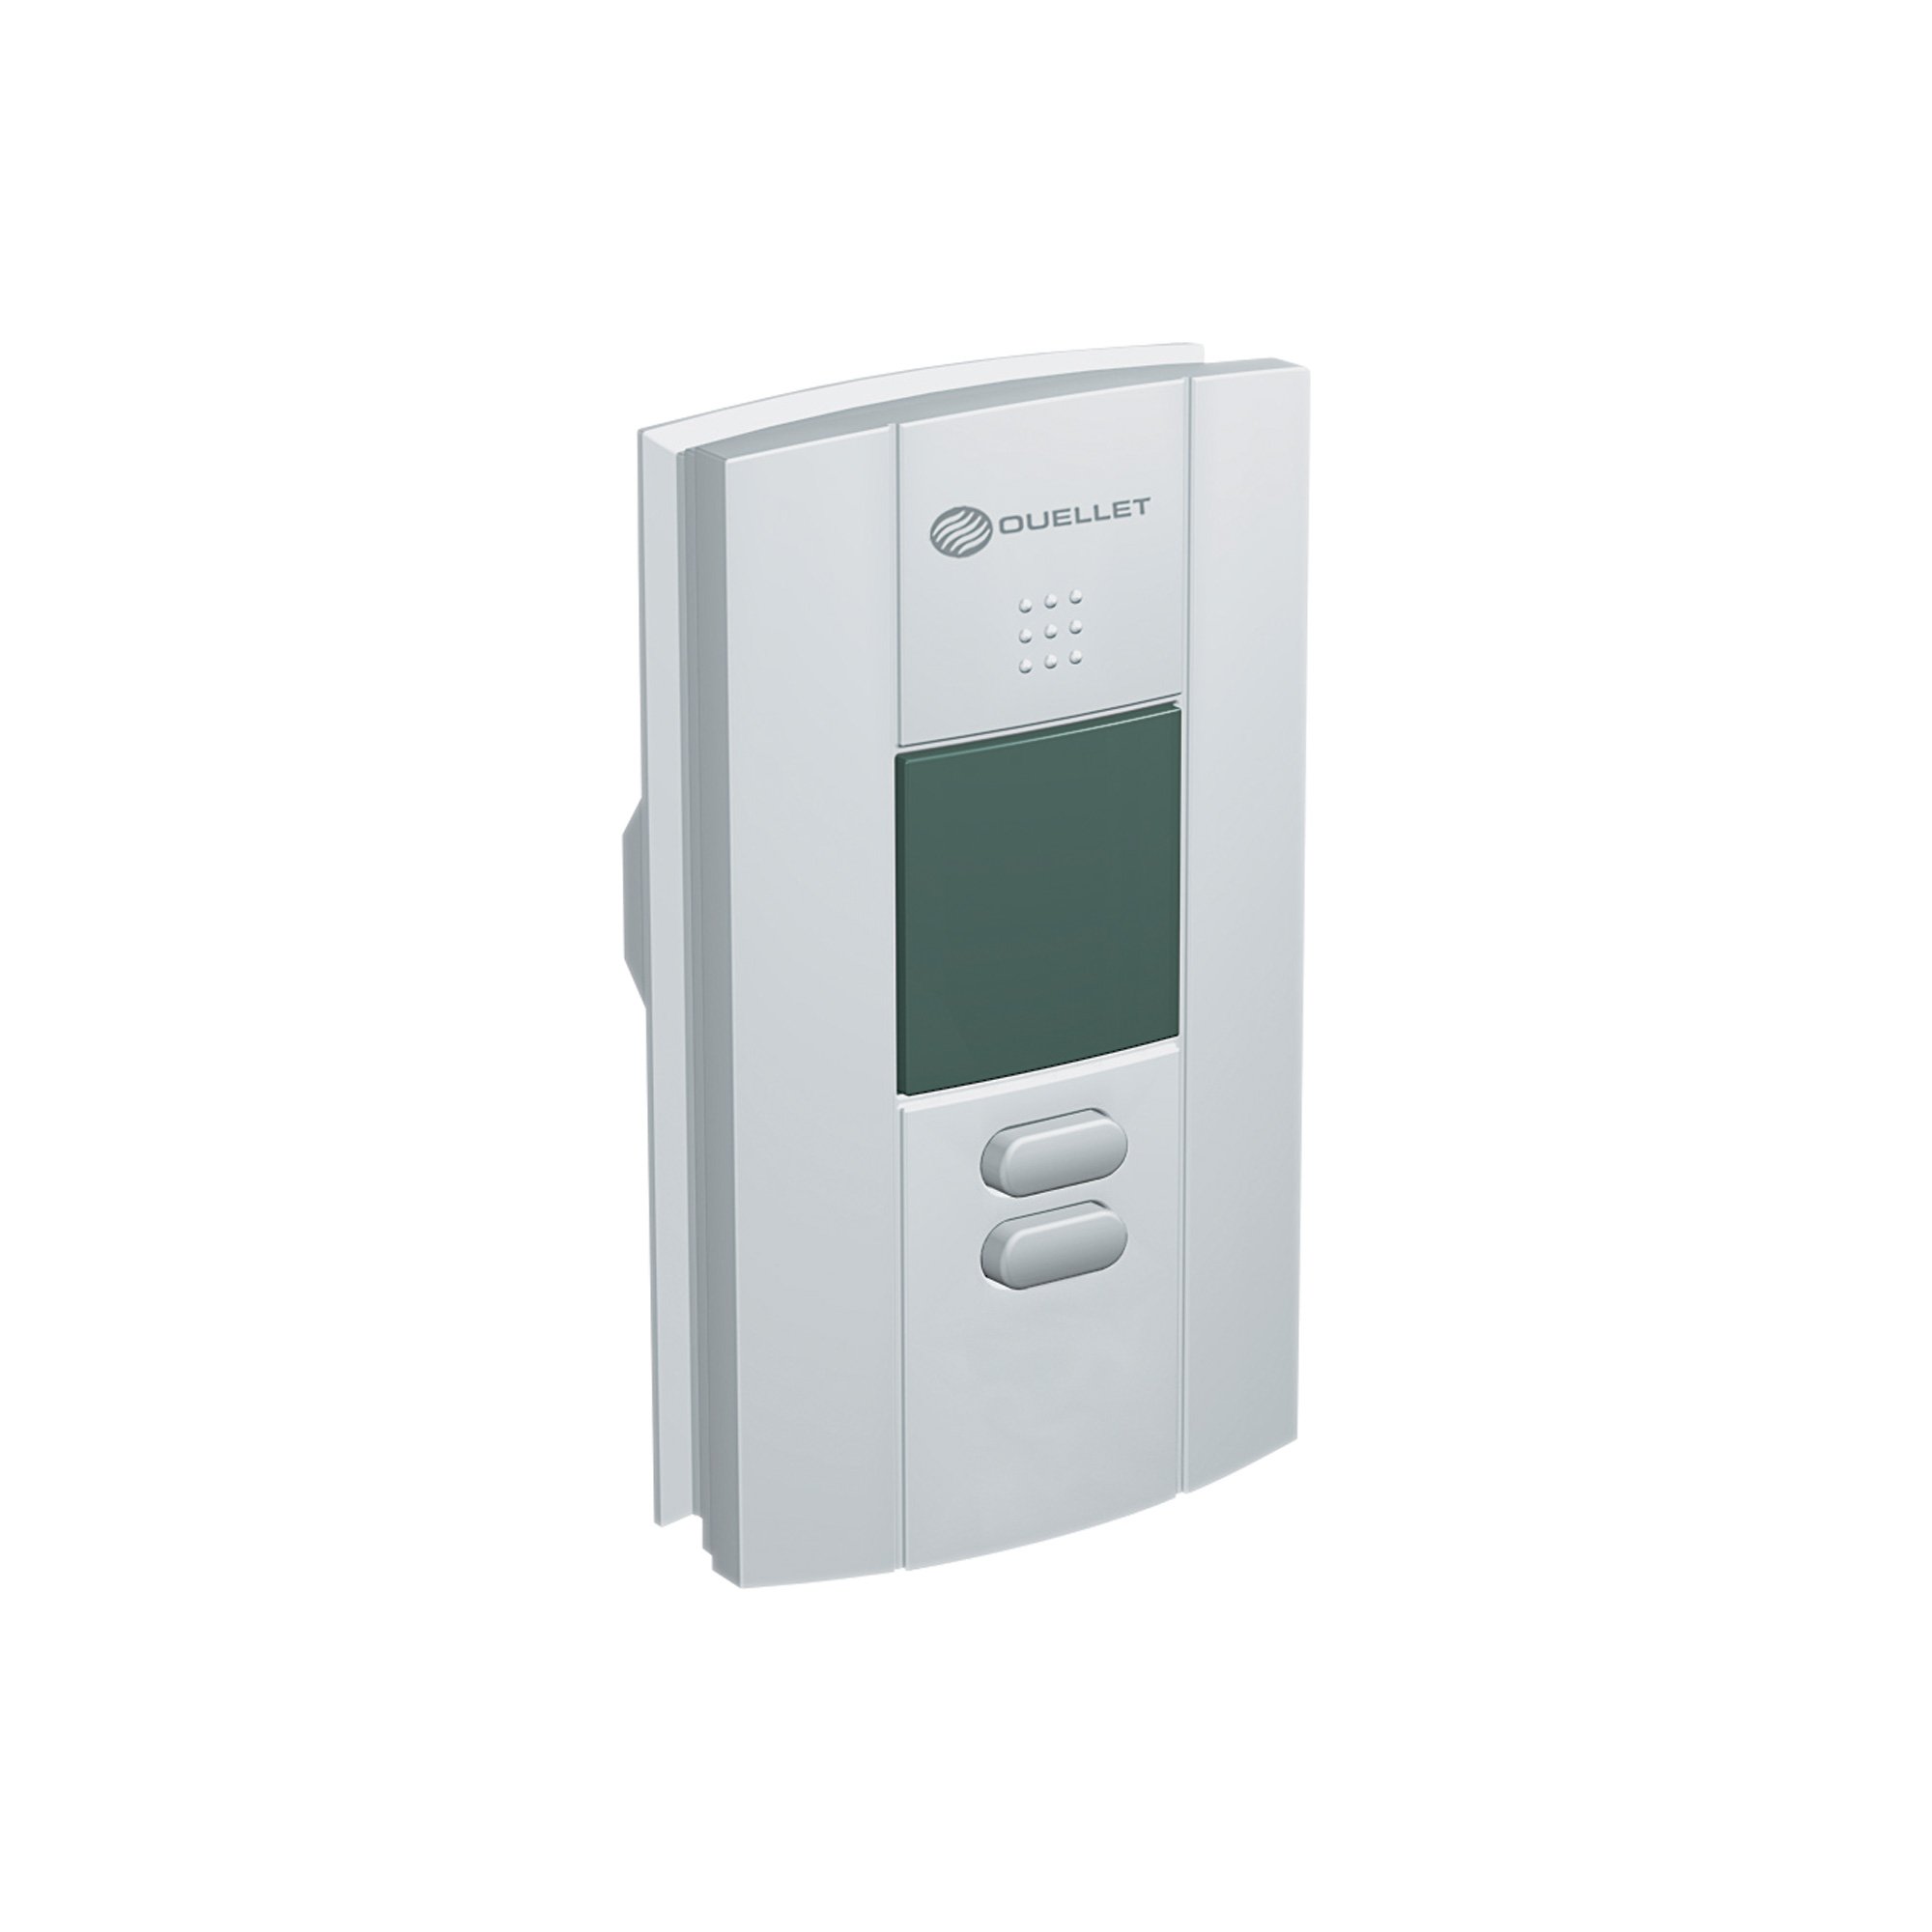 Ouellet Thermostat For Floor Heating